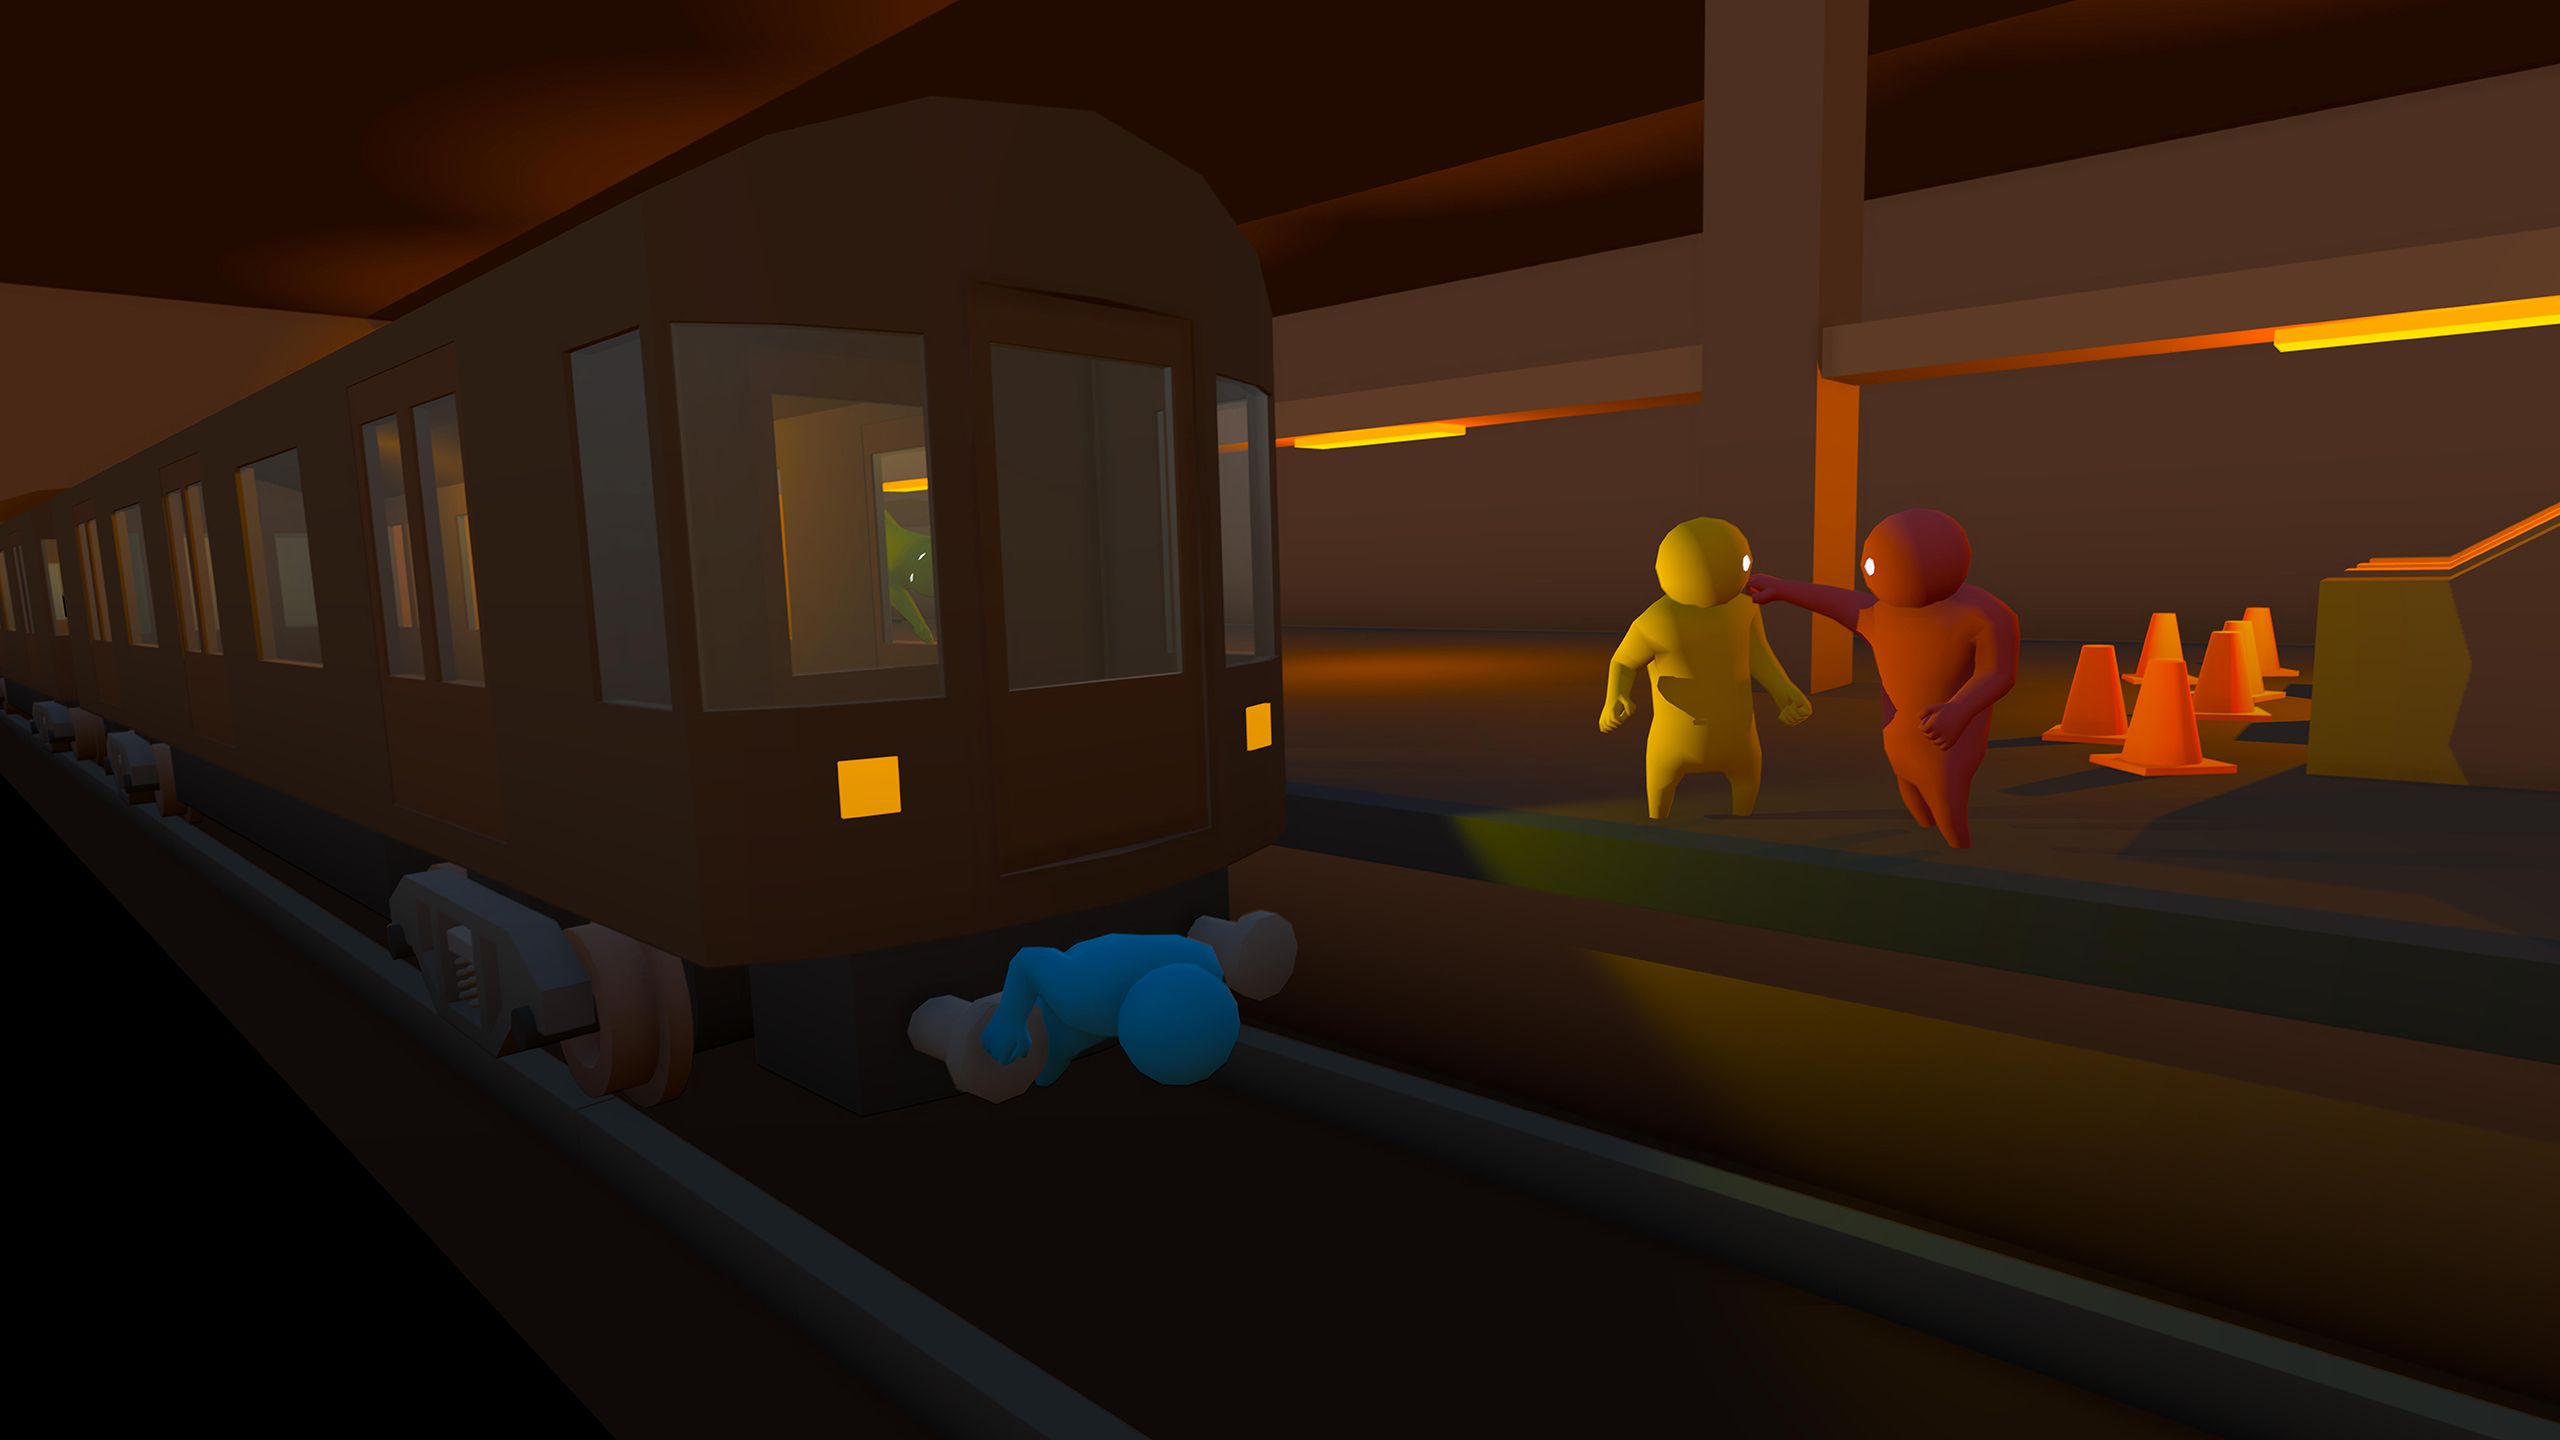 UNSUPPORTED PRE ALPHA Gang Beasts 0.0.3 (Windows) File